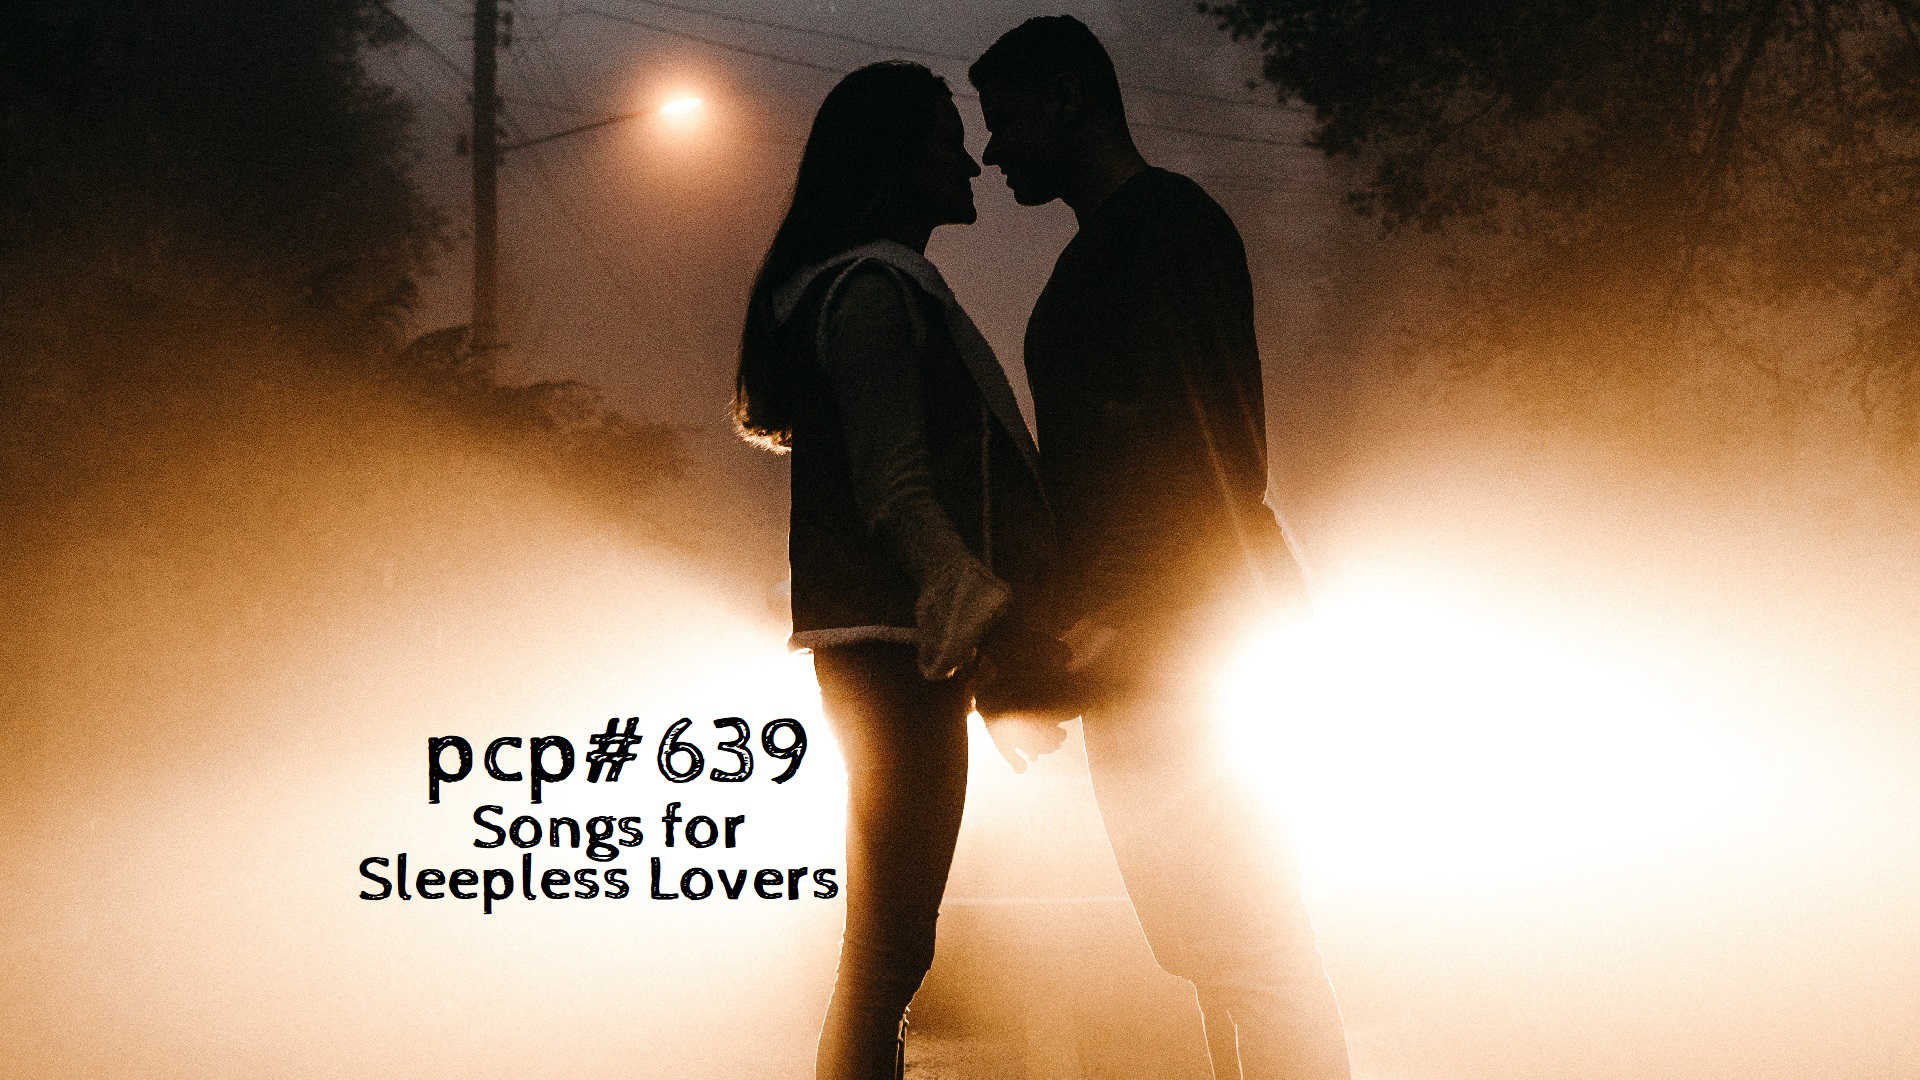 PCP#639... Songs for Sleepless Lovers....